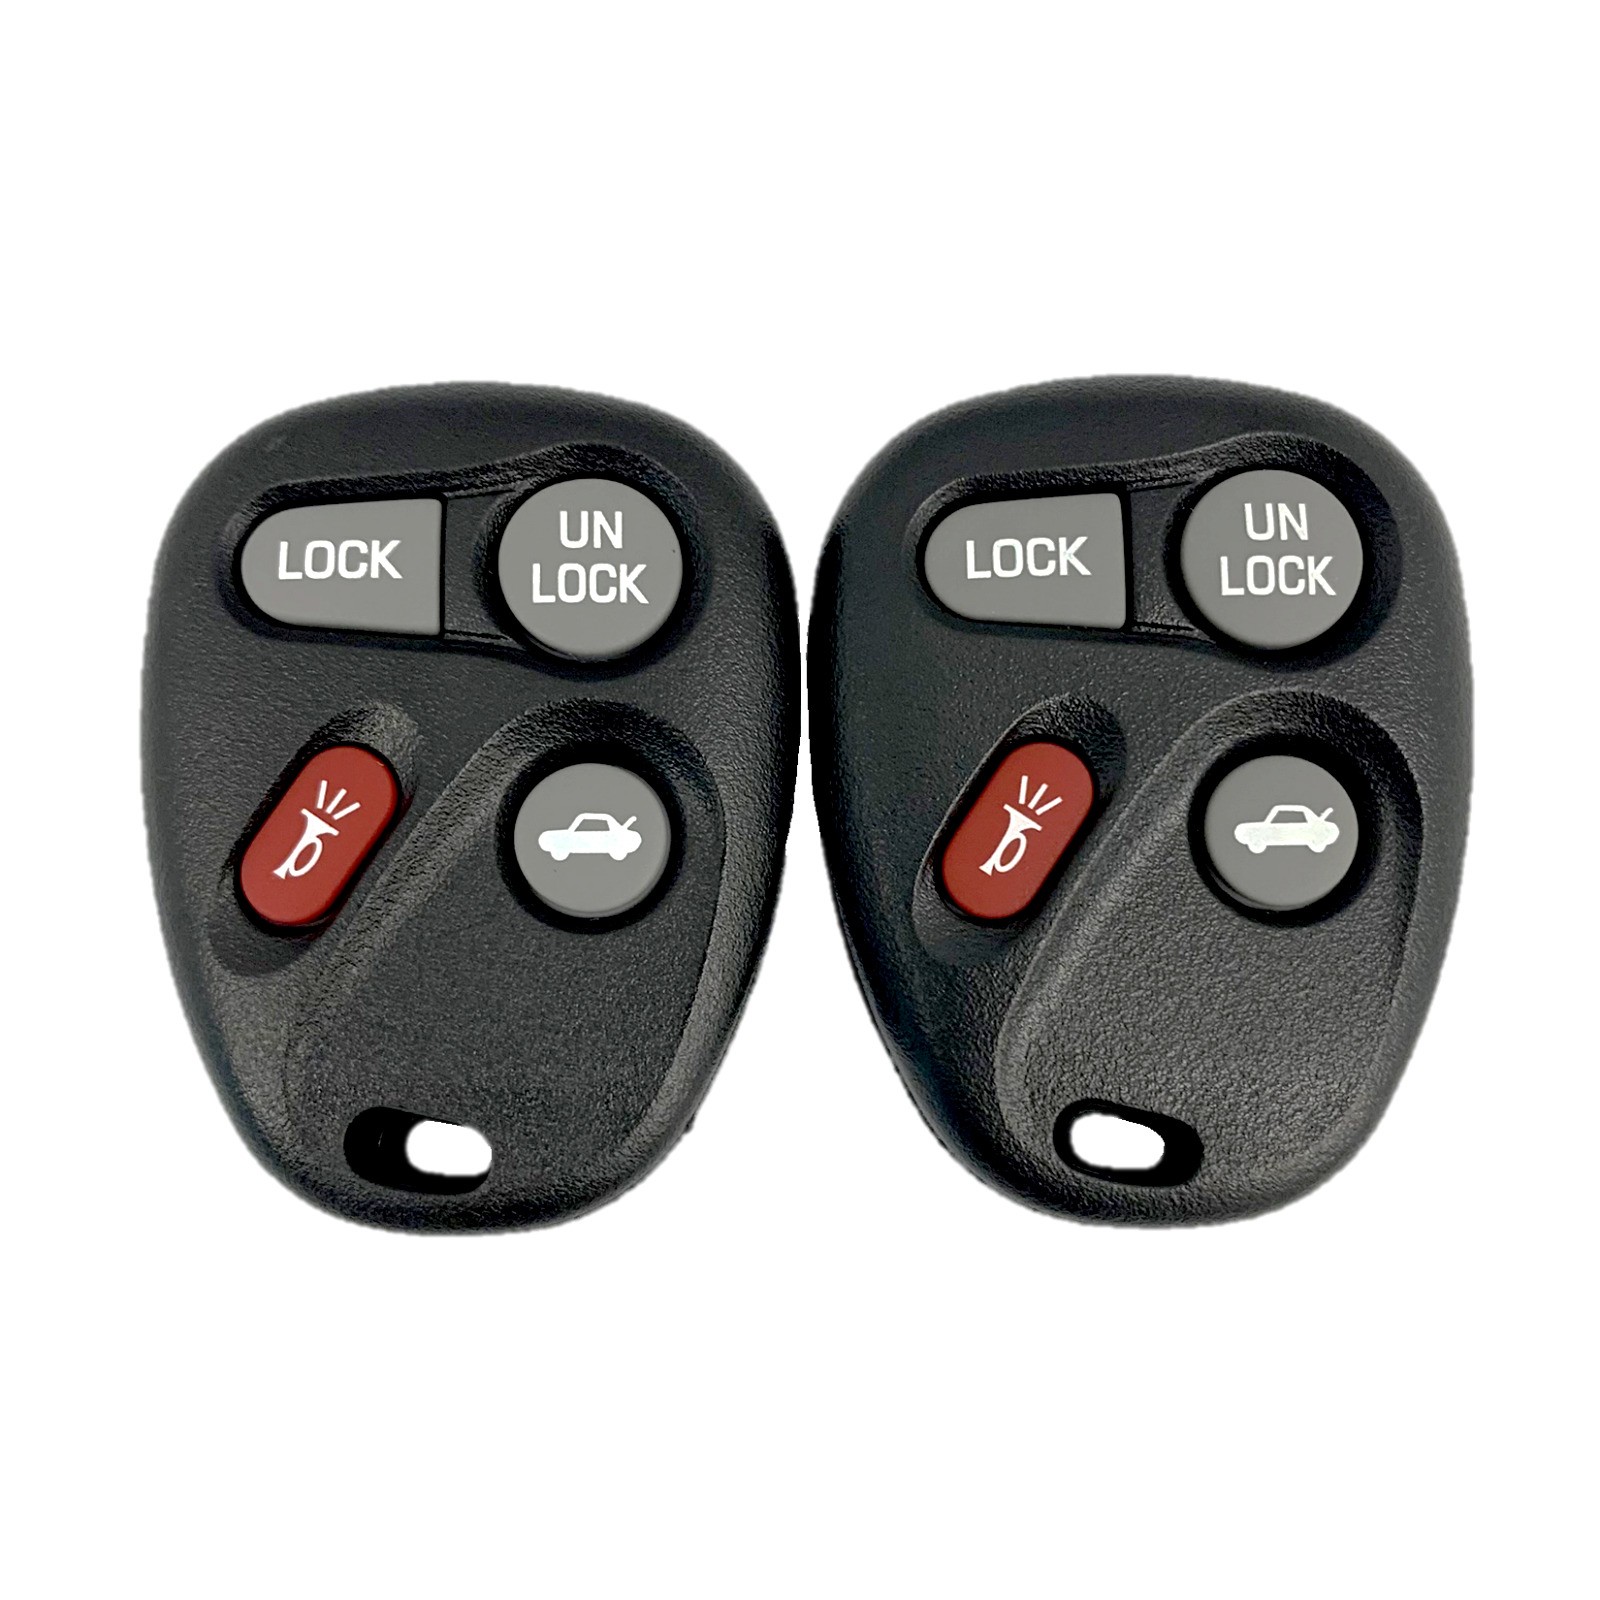 2 New OEM Electronics Keyless Entry Remote Fobs 4 Button L2C0005T 16263074-99